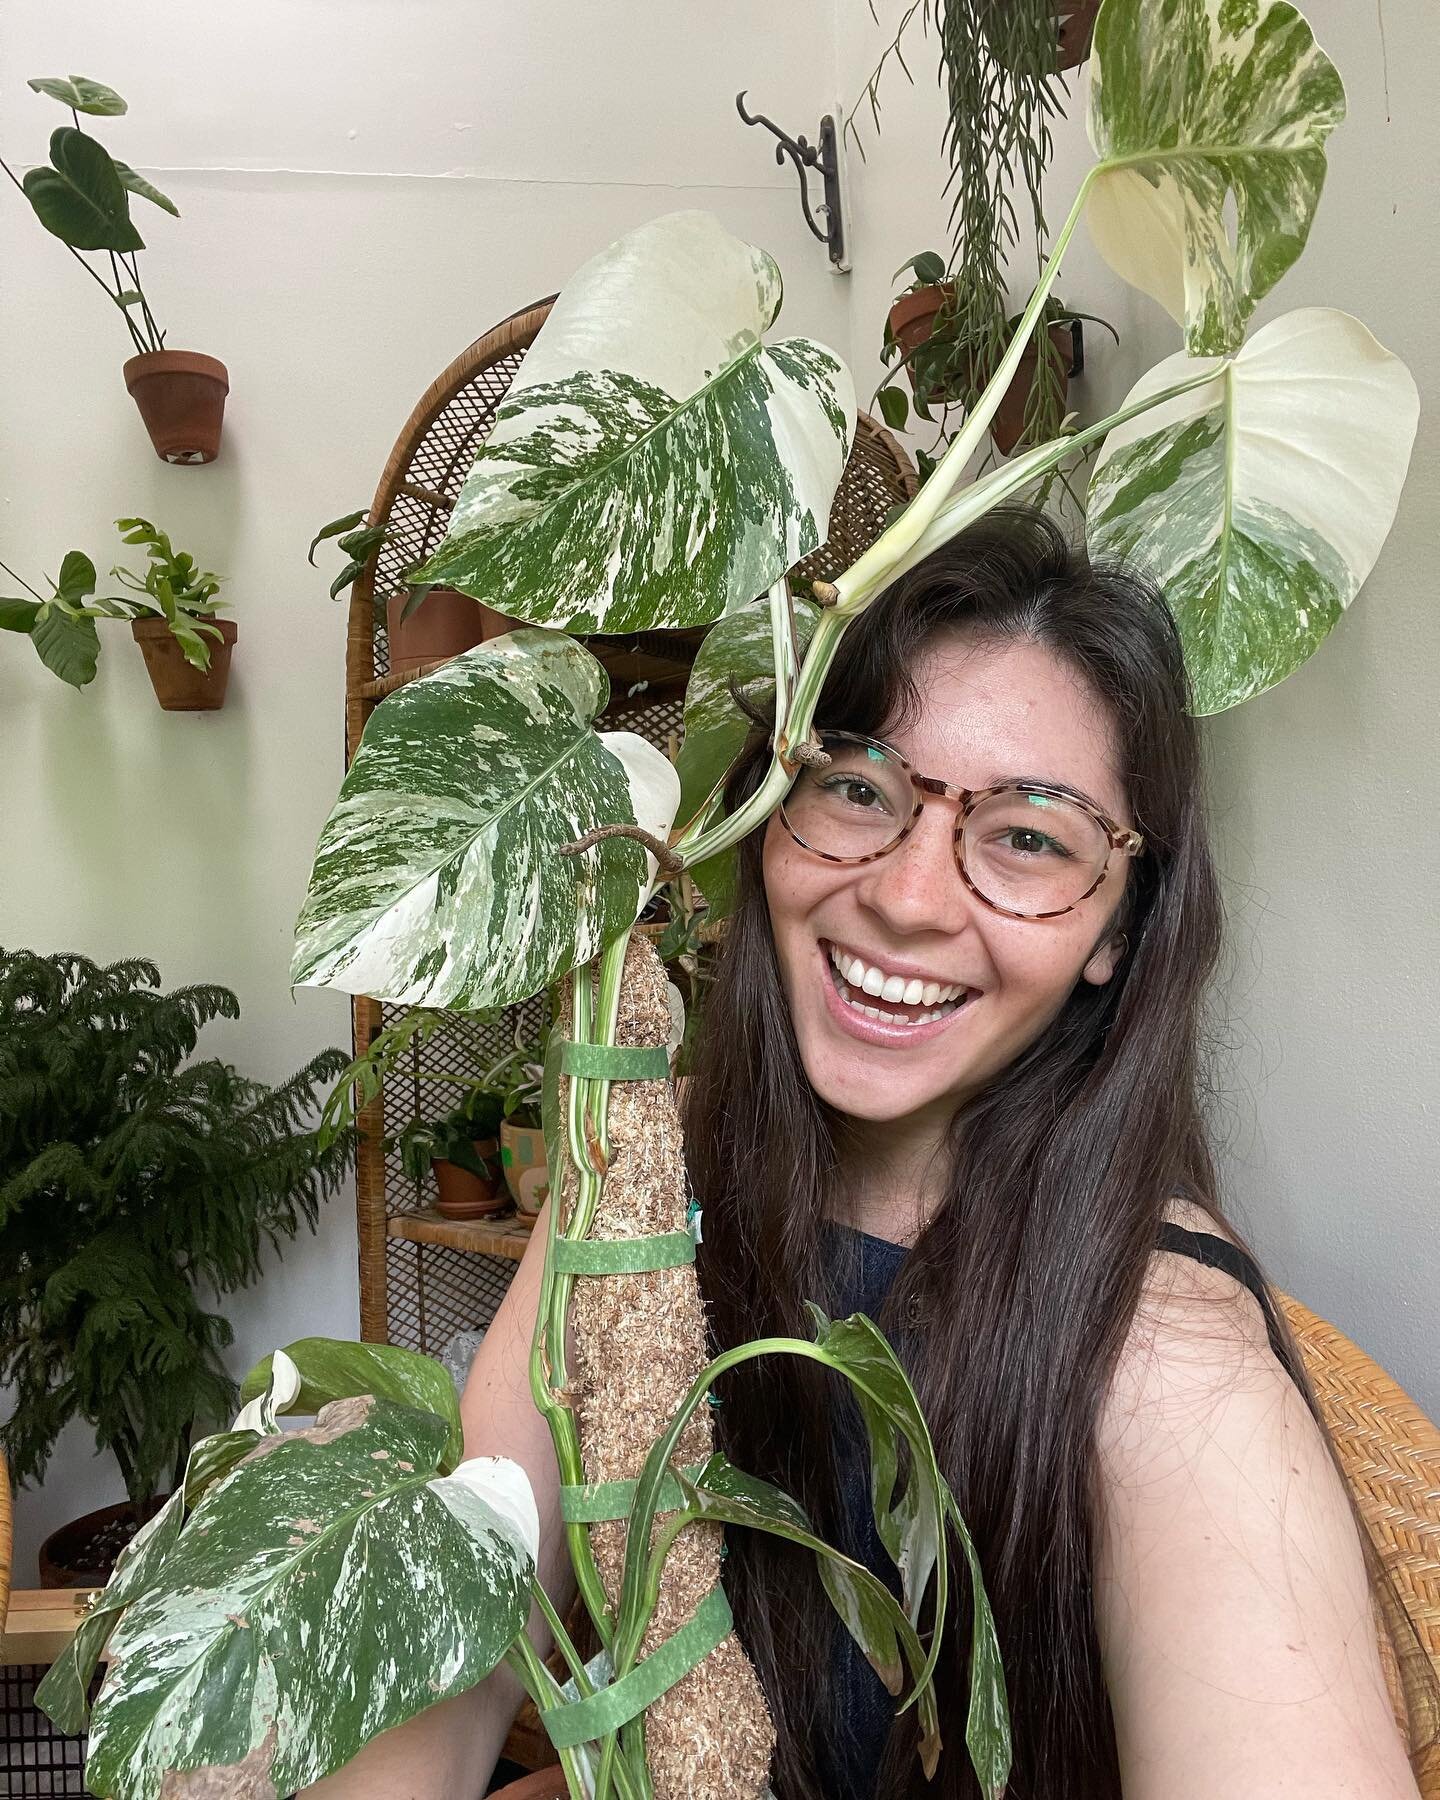 Let&rsquo;s play some PLANT TRIVIA!

In today&rsquo;s episode we learn some things... like how many edible species of plants there are. And which country has the most plant species. 

Head over to the pod and play along with us!